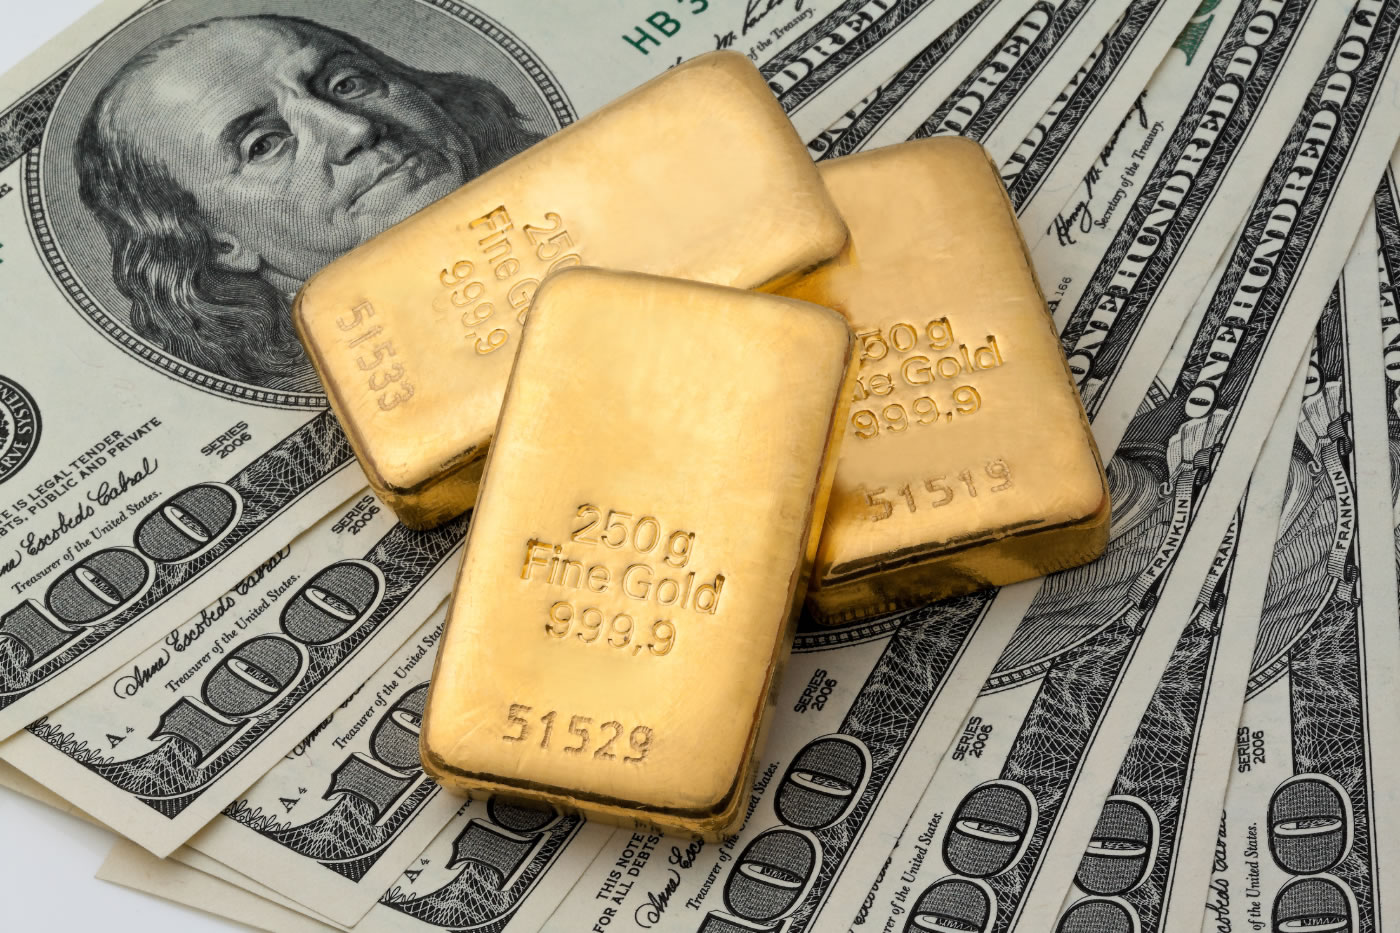 How Does its Karat affect Gold's Value?